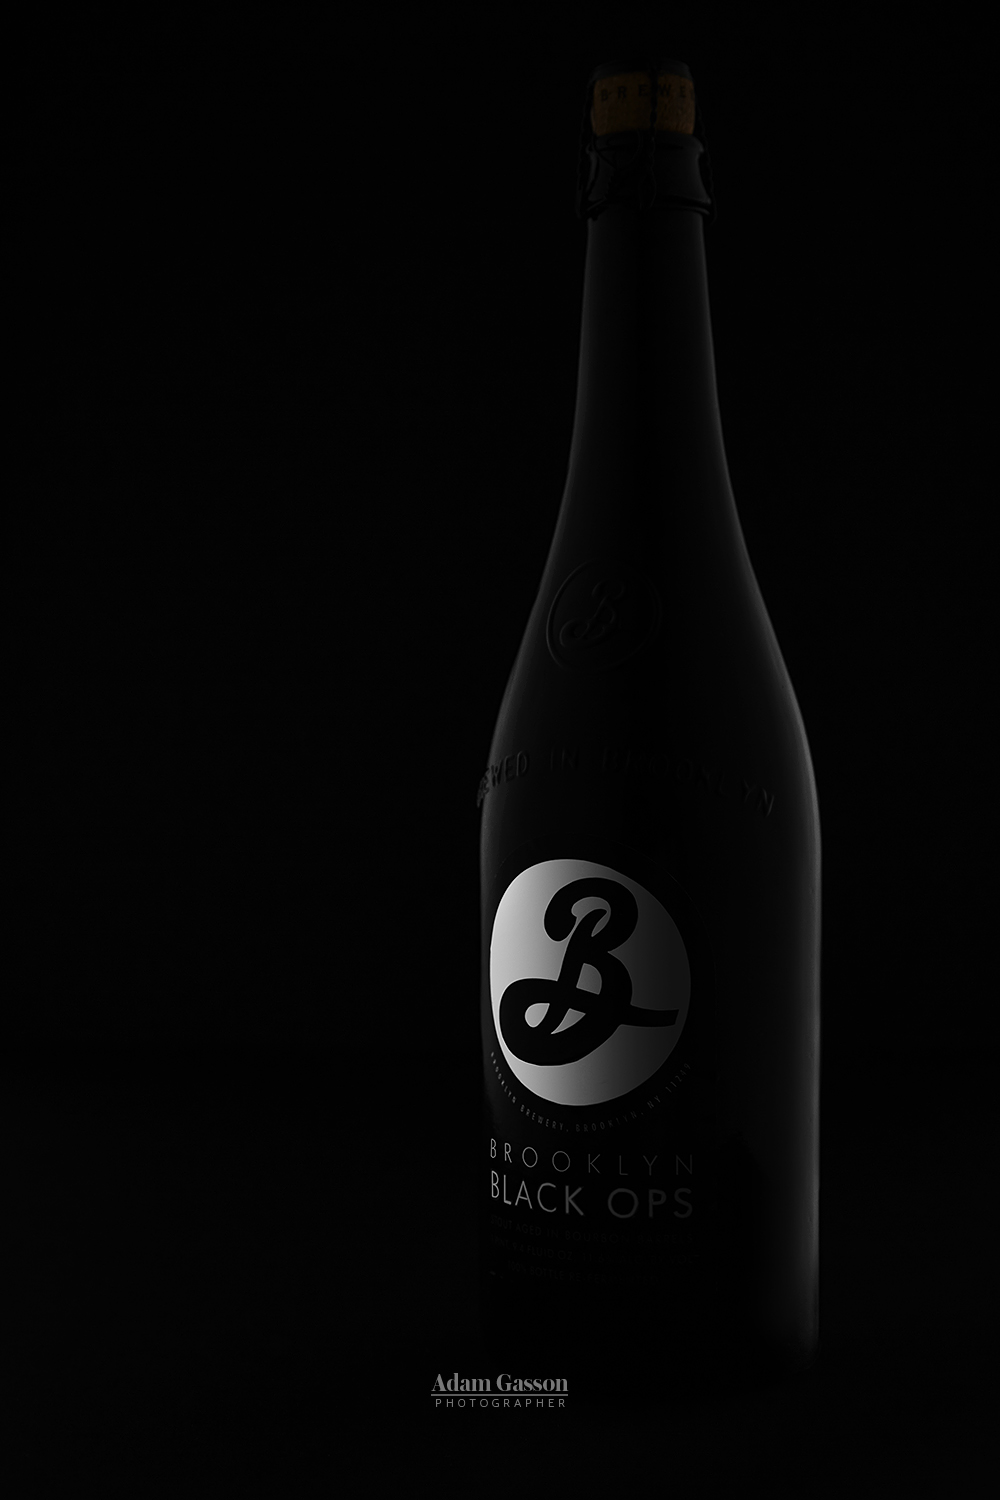 Brooklyn Brewery Black Ops 2014 craft beer.Copyright Adam Gasson. All rights reserved. All images must be credited Adam Gasson / adamgasson.com